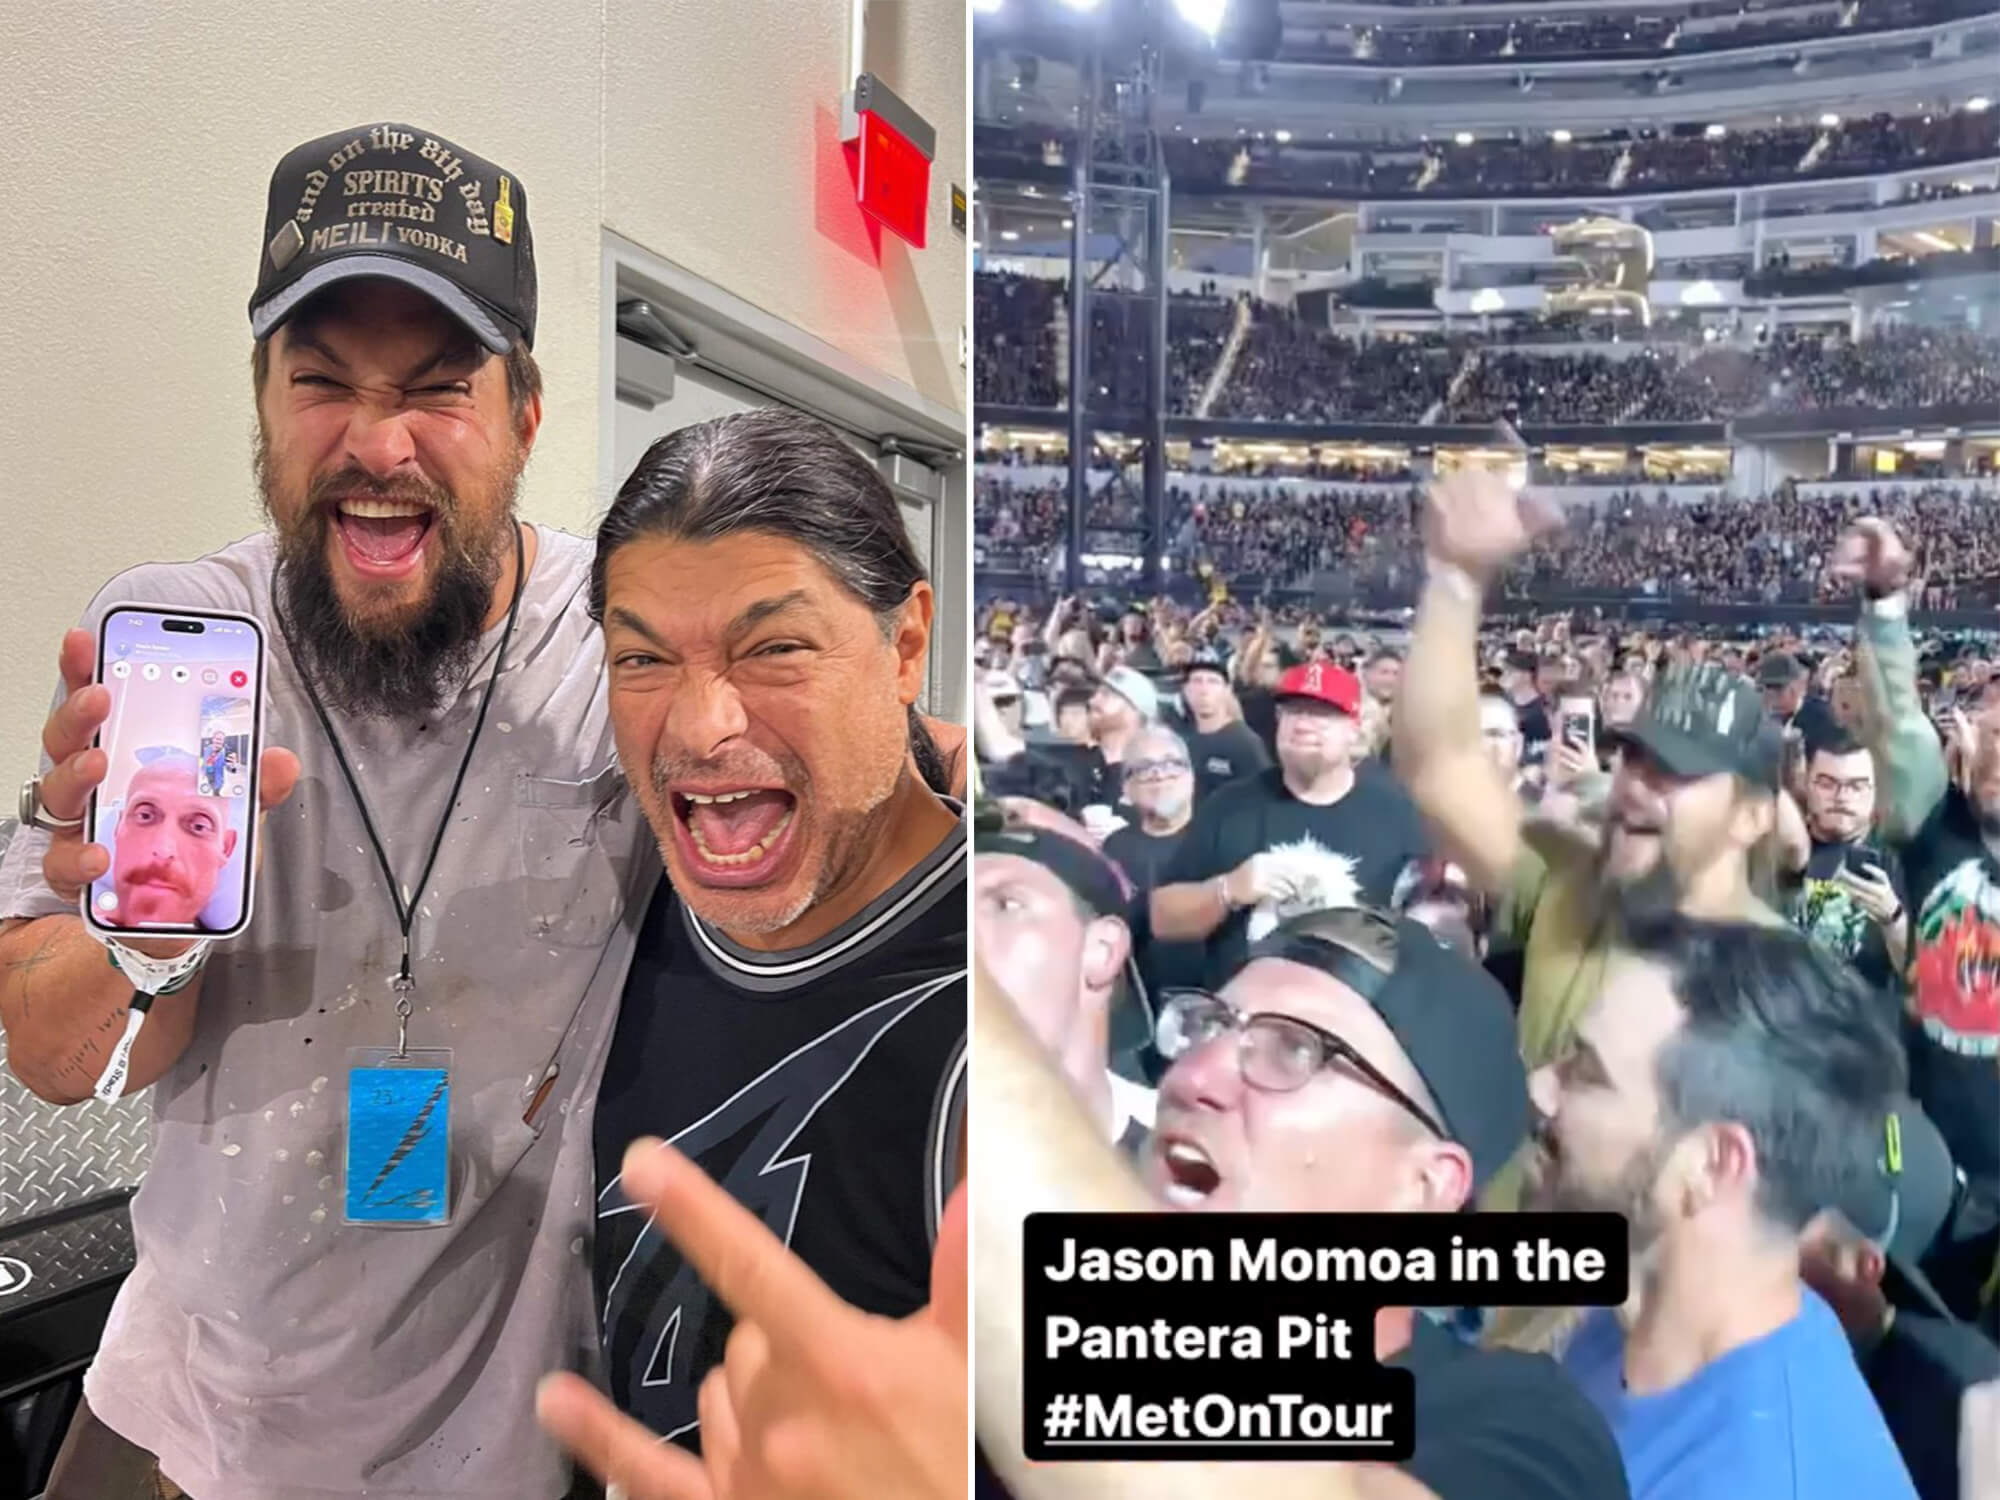 Left - Jason Momoa pictured with Robert Trujillo, he's holding his phone where his friend who could not attend is on a video call. Right - a screen capture of Momoa in a pit.